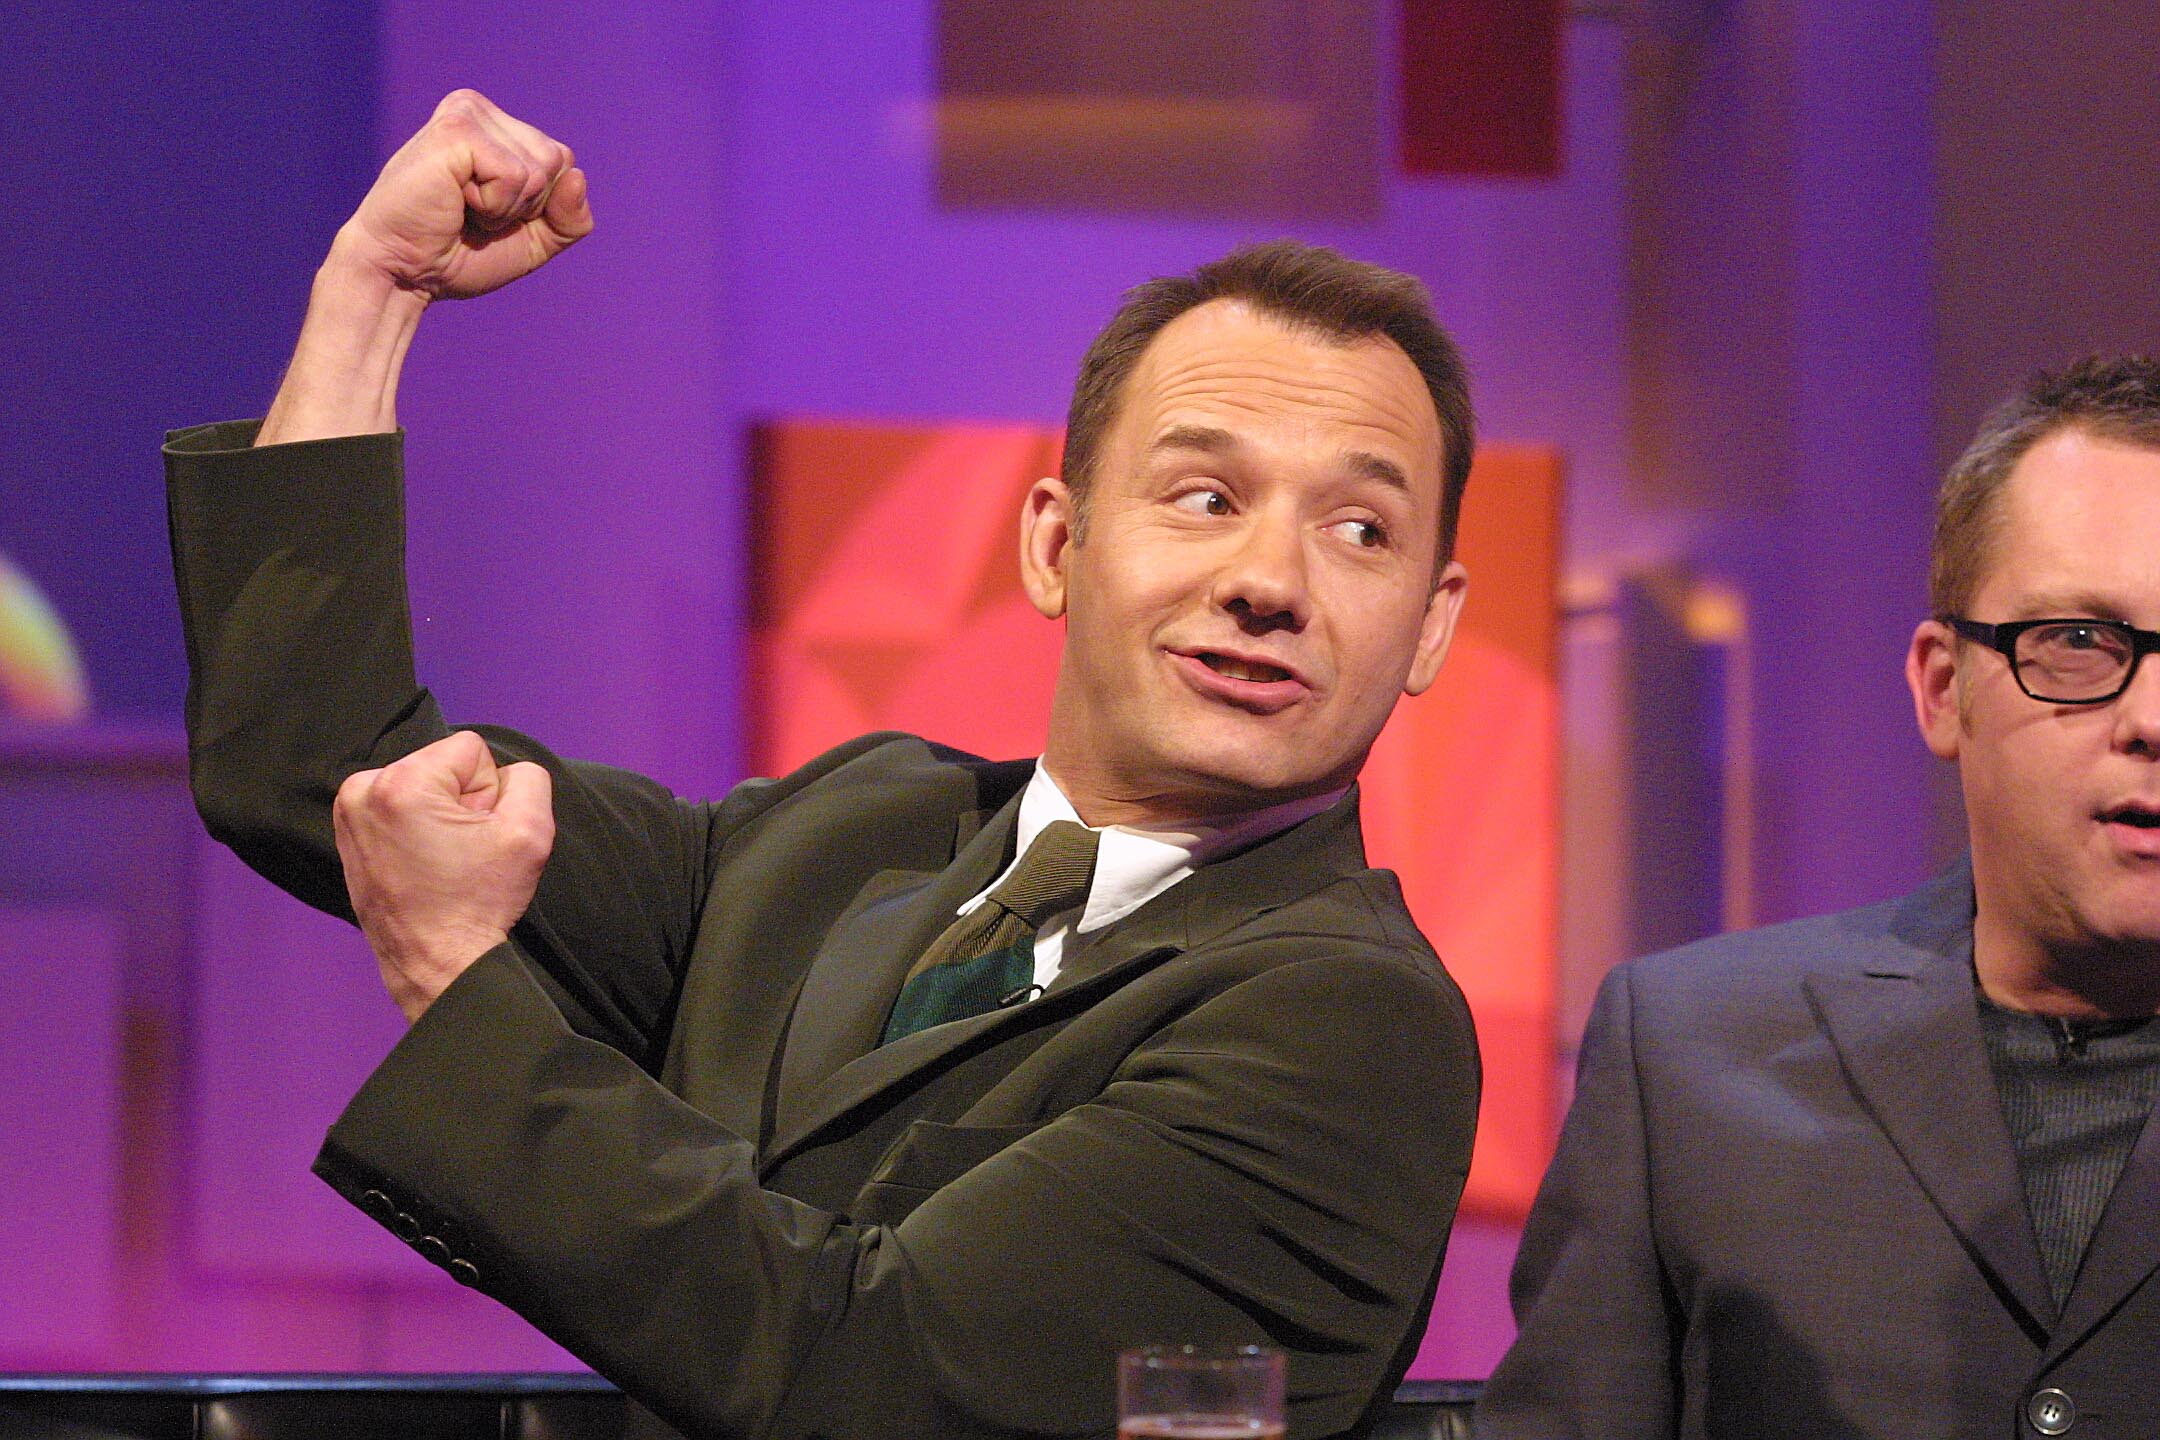 Bob Mortimer - Meet A Nice Blogged Image Archive